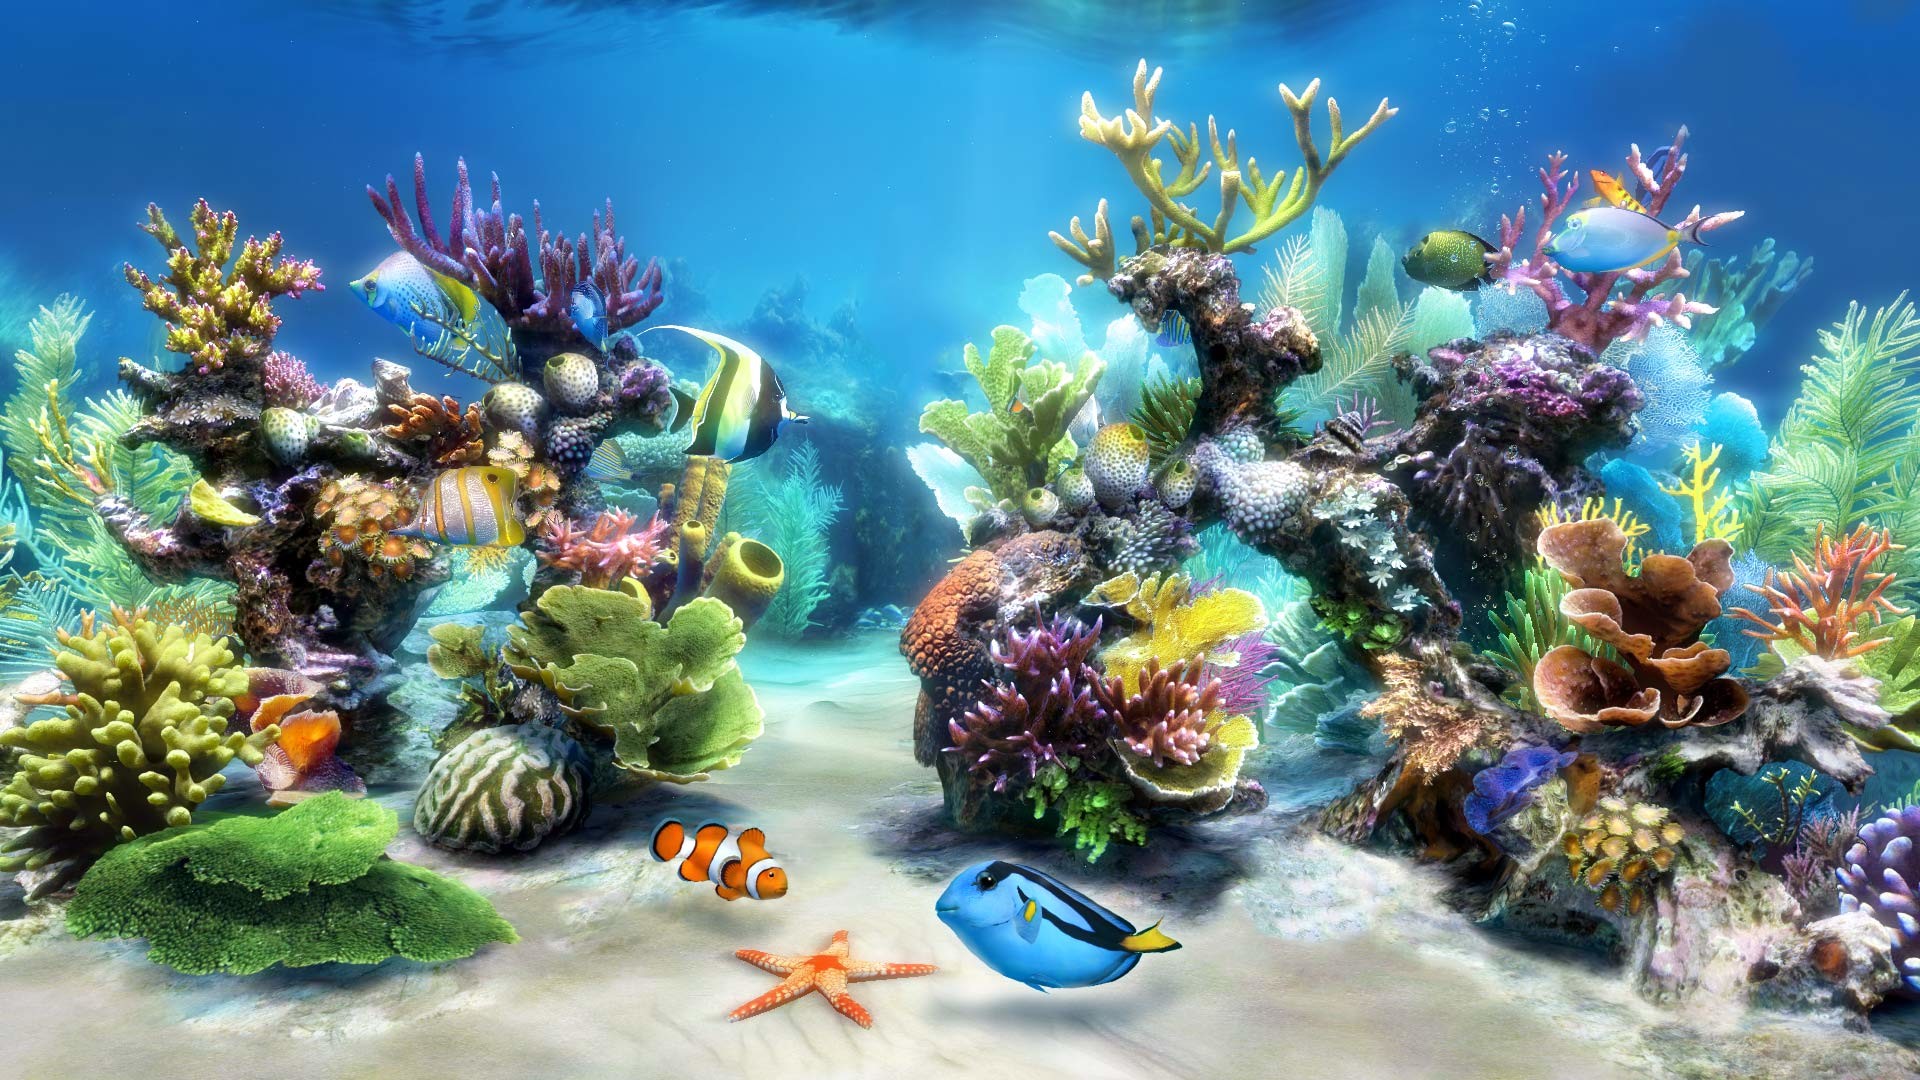 Coral Reef Live Wallpaper (59+ images)